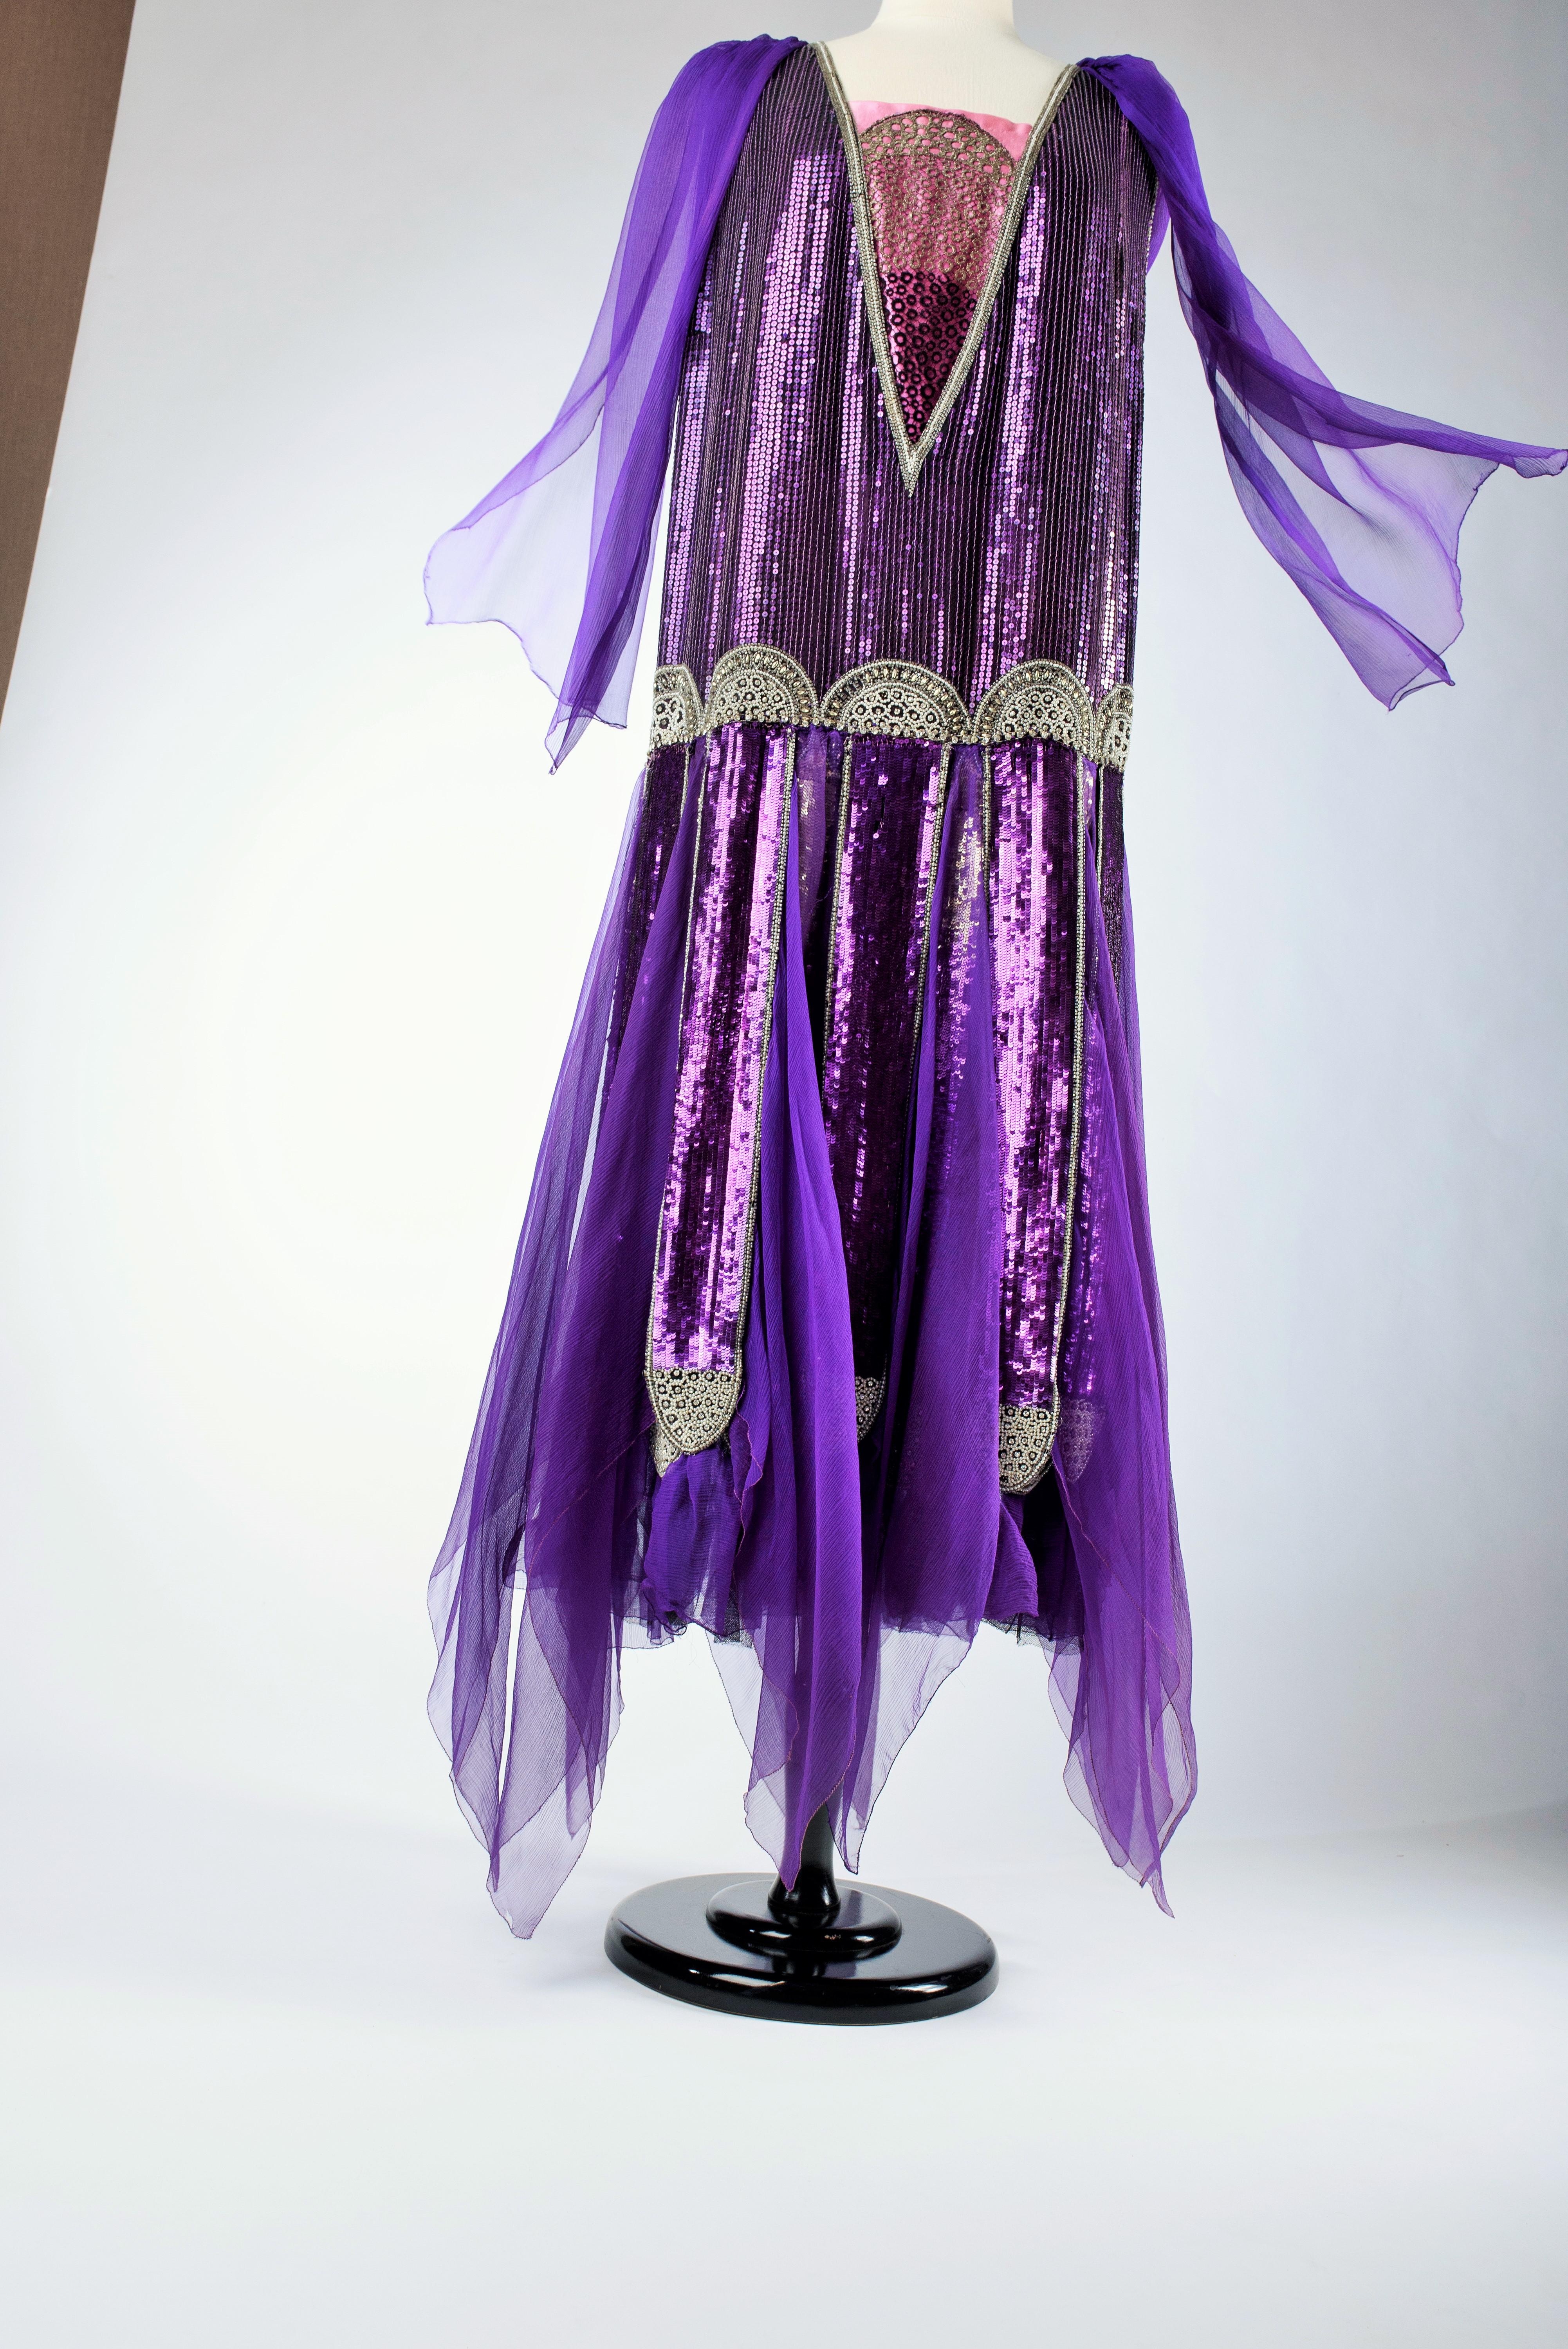 Women's A Paul Poiret Ball Gown in Sequined Silk Crepe and Satin - France Circa 1925 For Sale